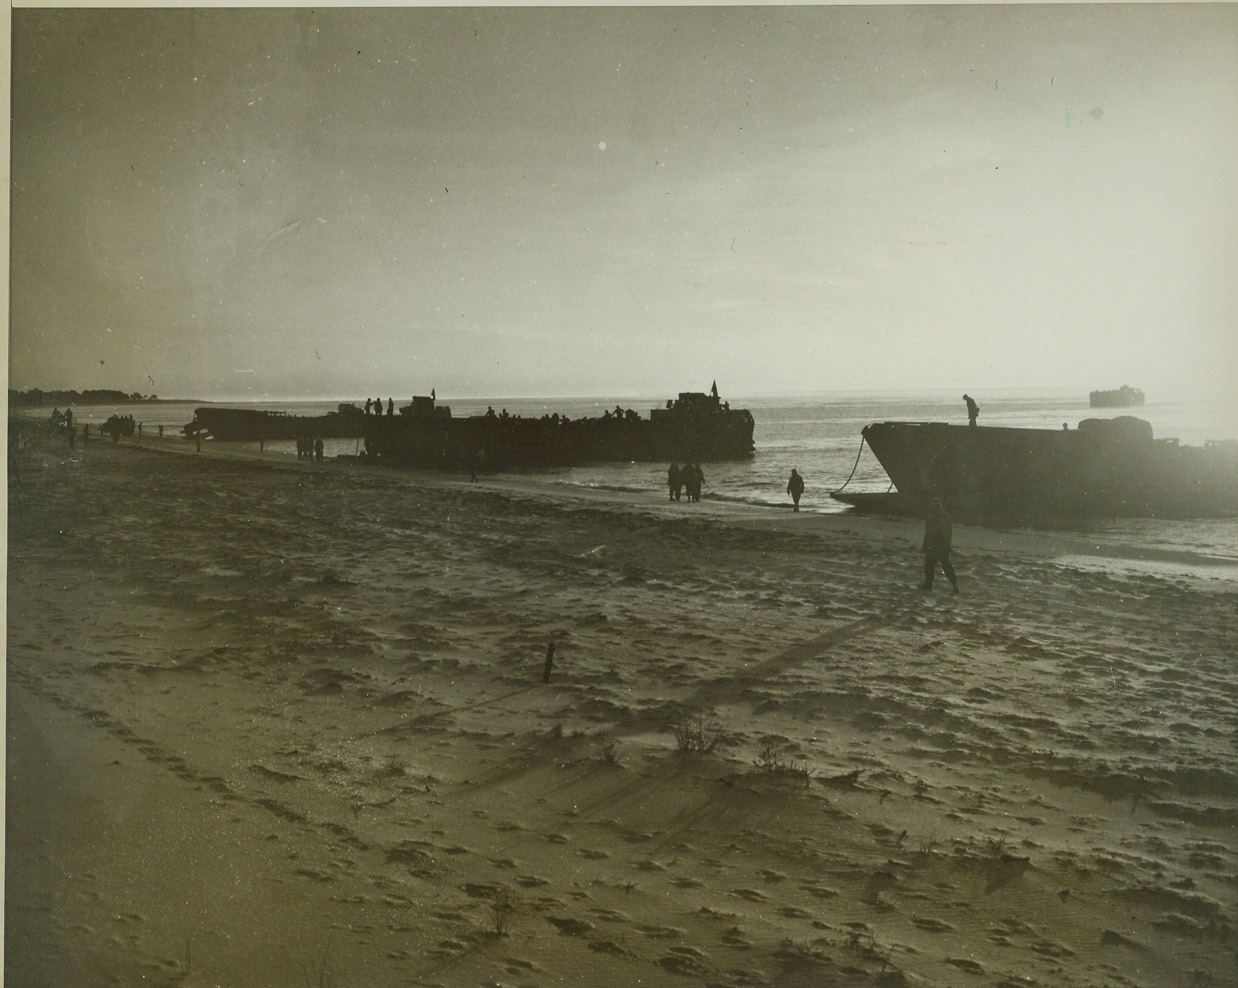 Amphibian Engineers Come Ashore (4), 12/20/1942. Camp Carrabelle, Fla.—Landing craft of the Amphibian Engineer Command are shown beached on the Gulf of Mexico shore at sunrise during landing maneuvers. Credit: ACME.;